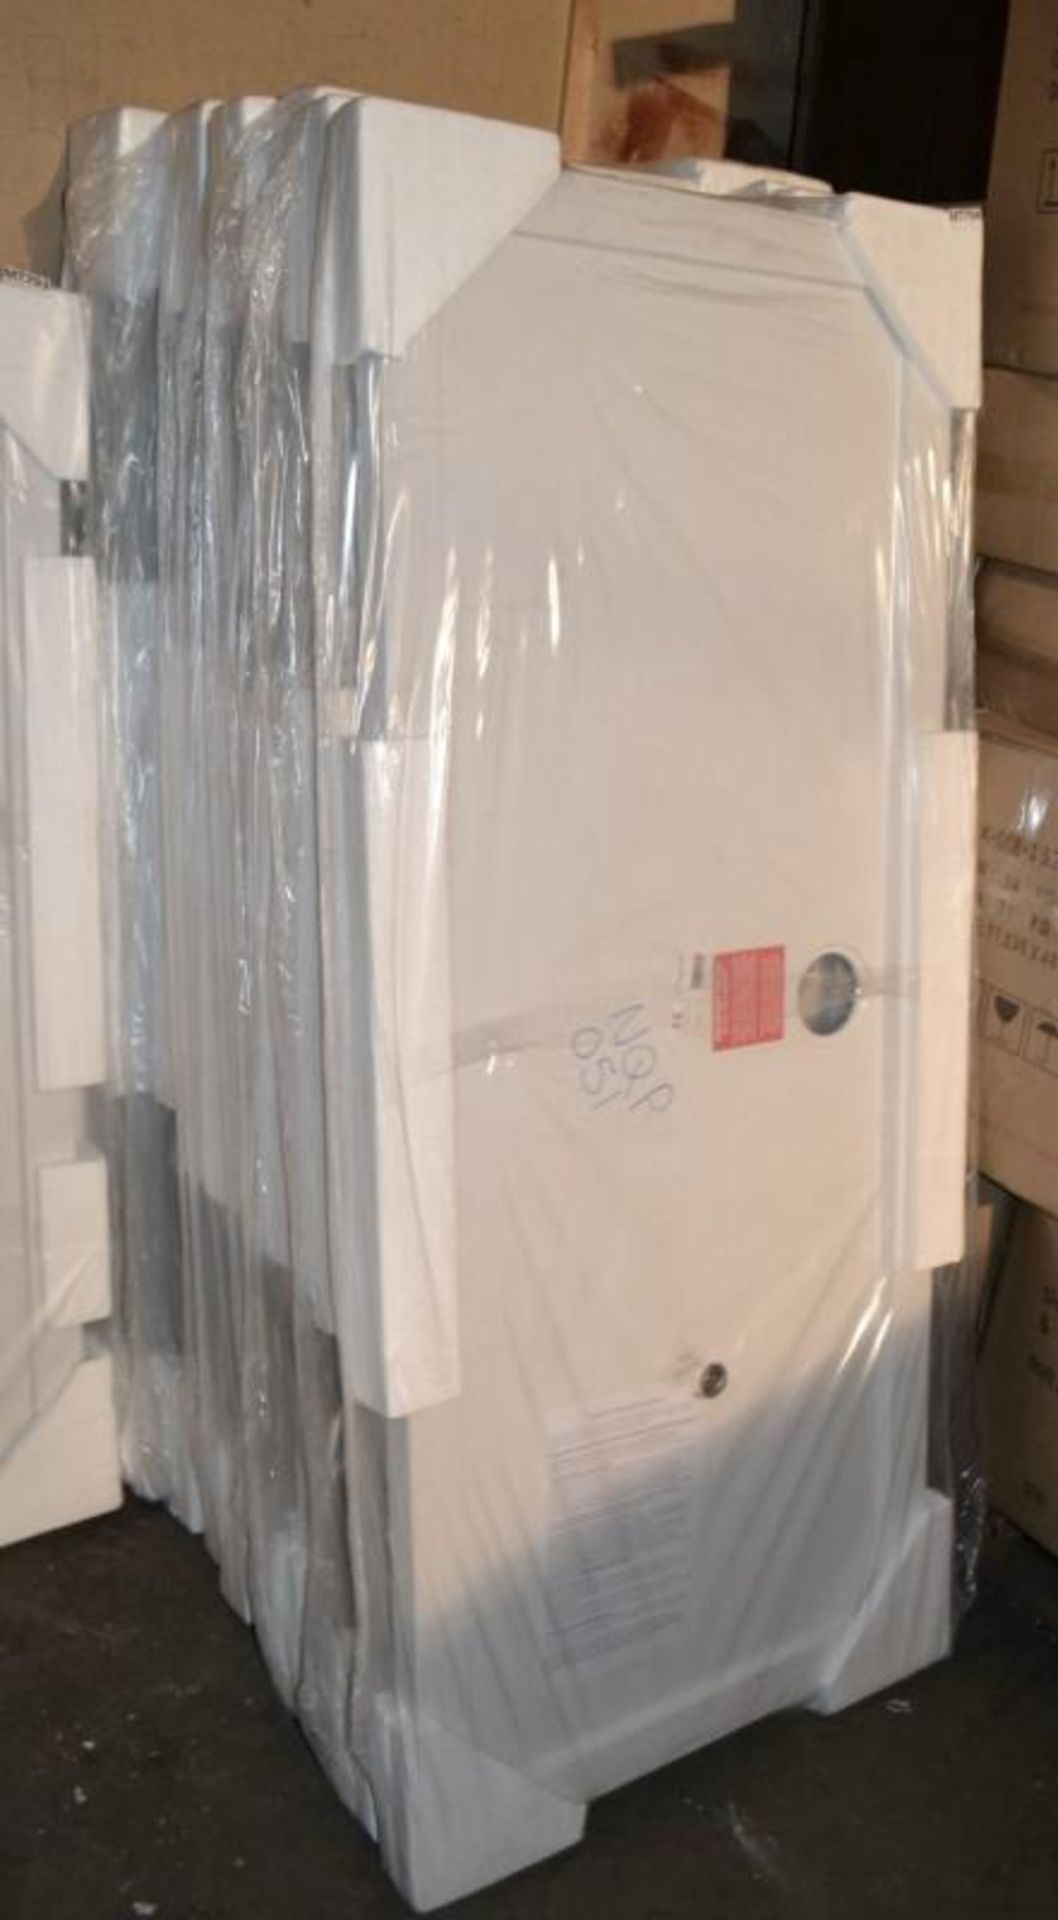 1 x Rectangular Shower Tray (TRIM051) - Dimensions: 1600 x 700mm - New / Unused Sealed Stock - CL269 - Image 2 of 2